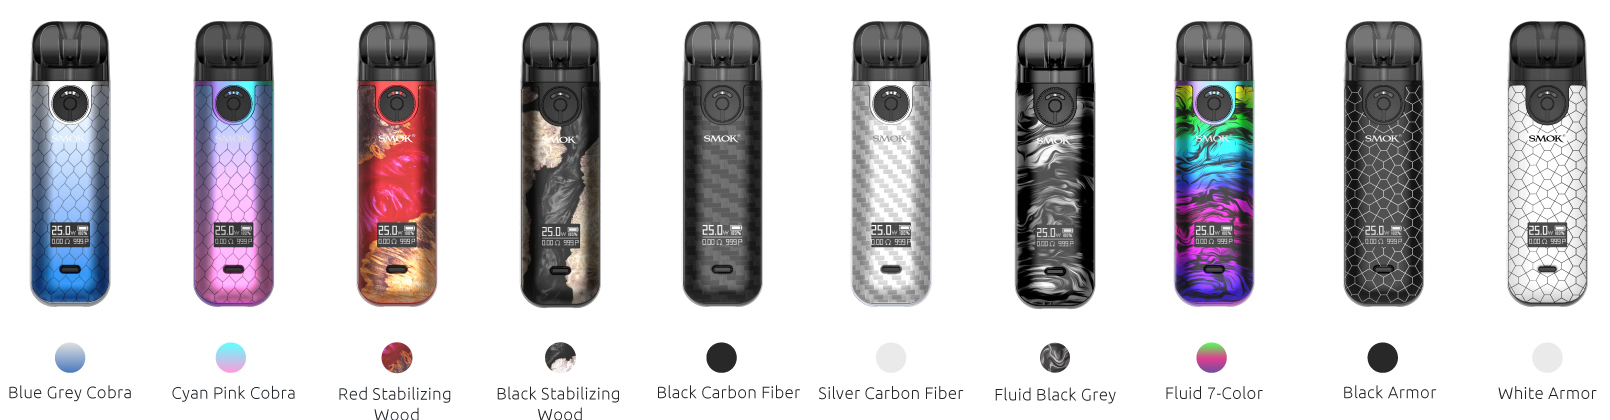 Several SMOK Novo 4 pod devices in a variety of colors and designs.